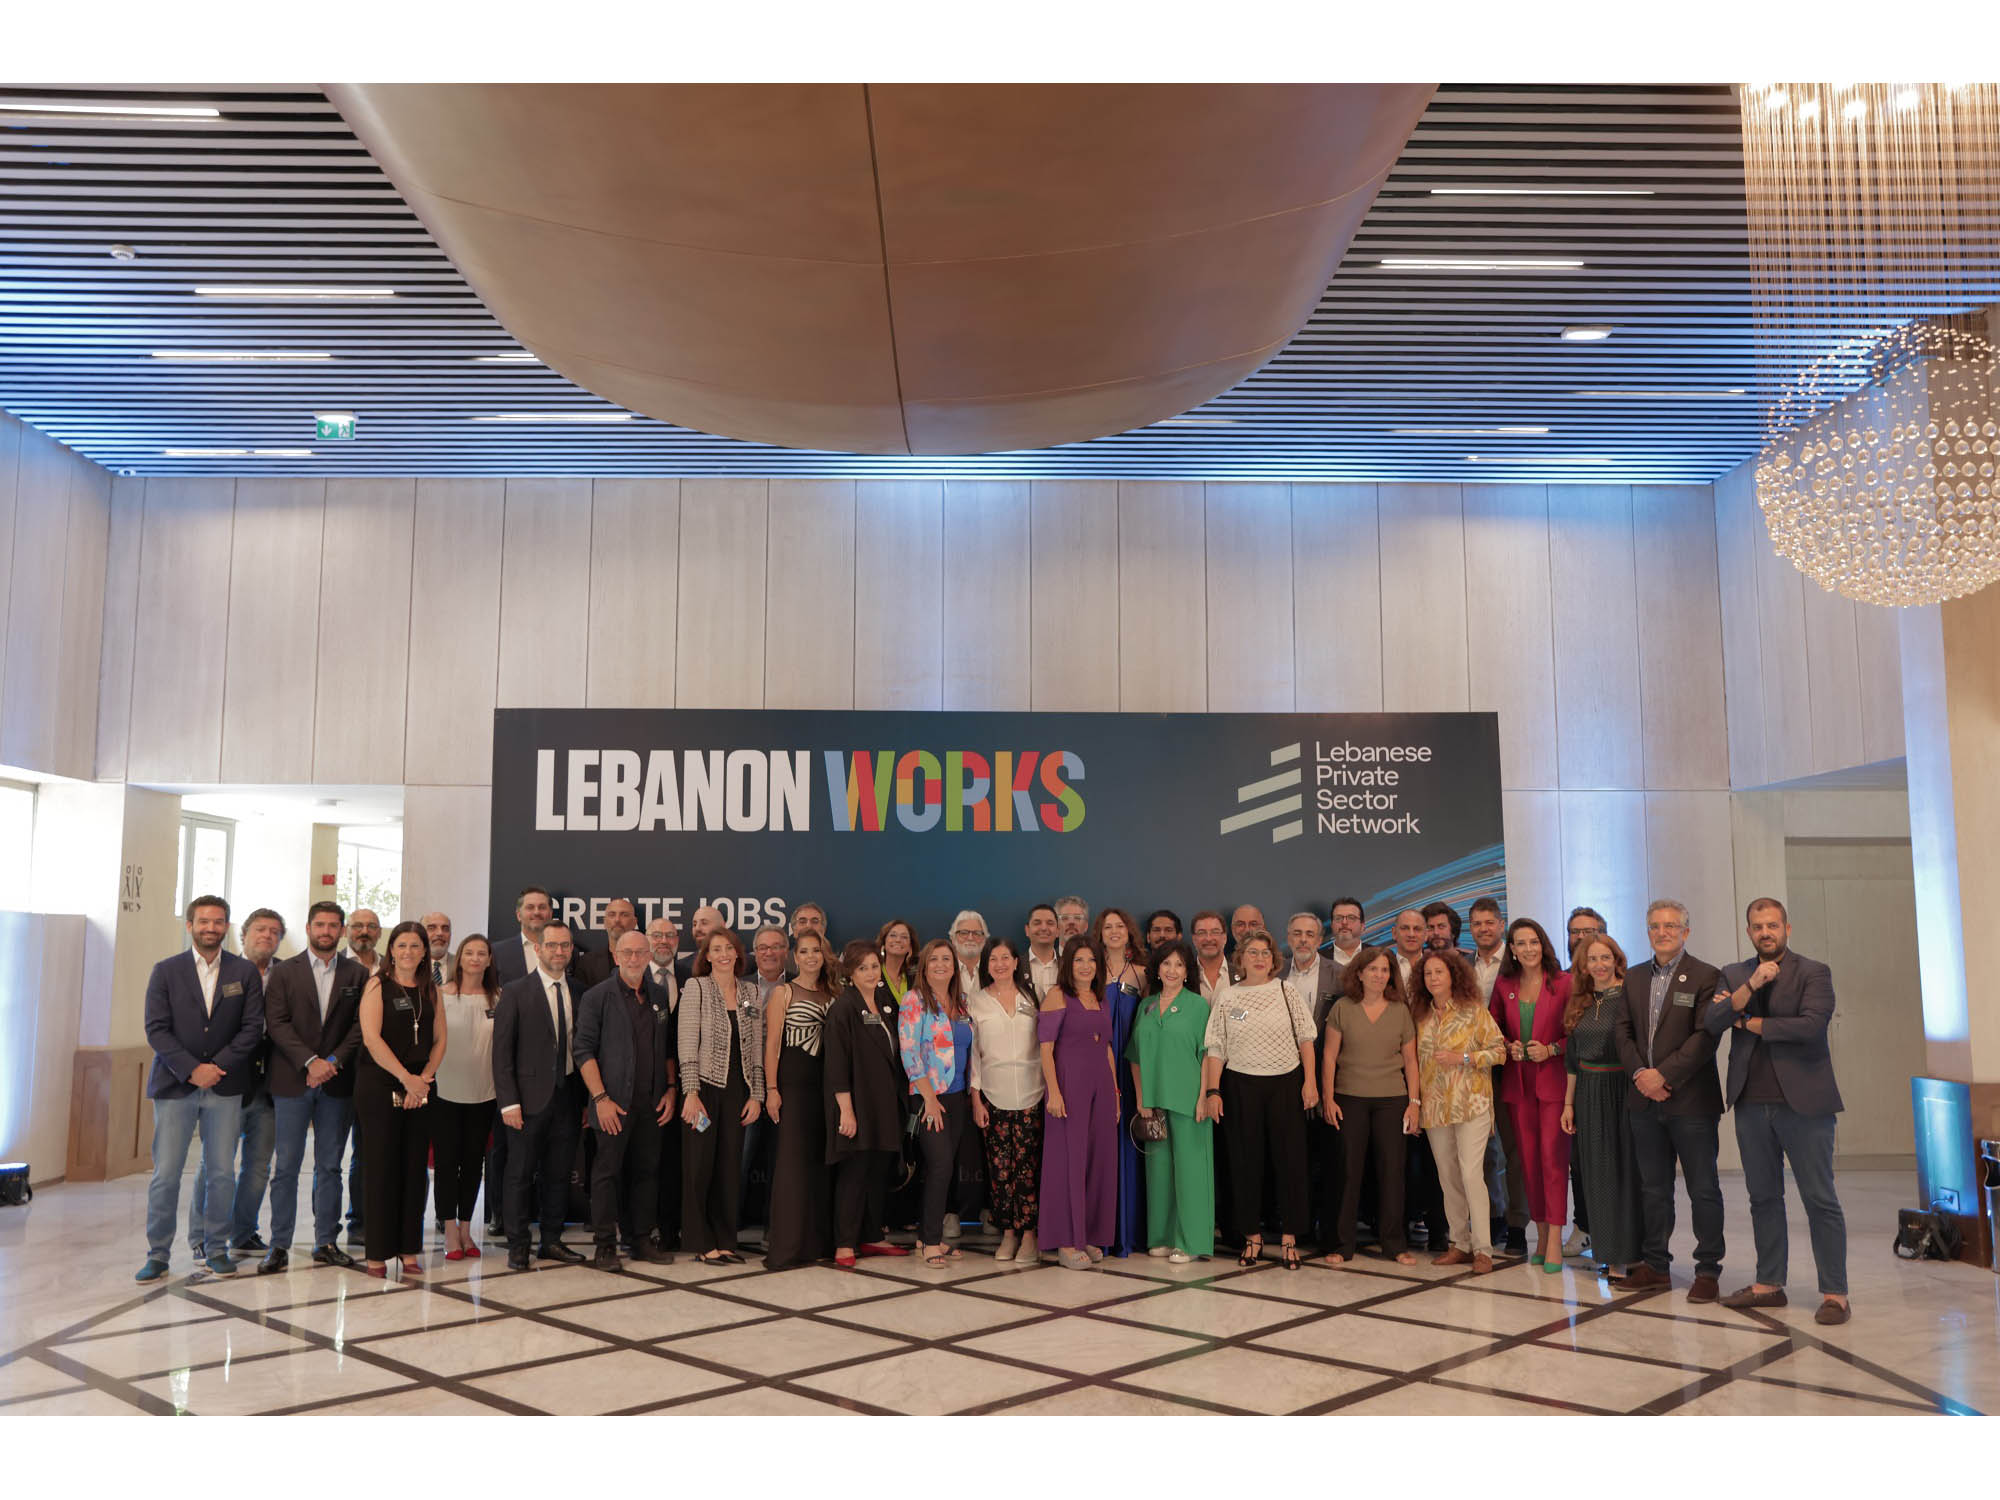 Lebanon Works, a national job creation initiative launched by the Lebanese Private Sector Network